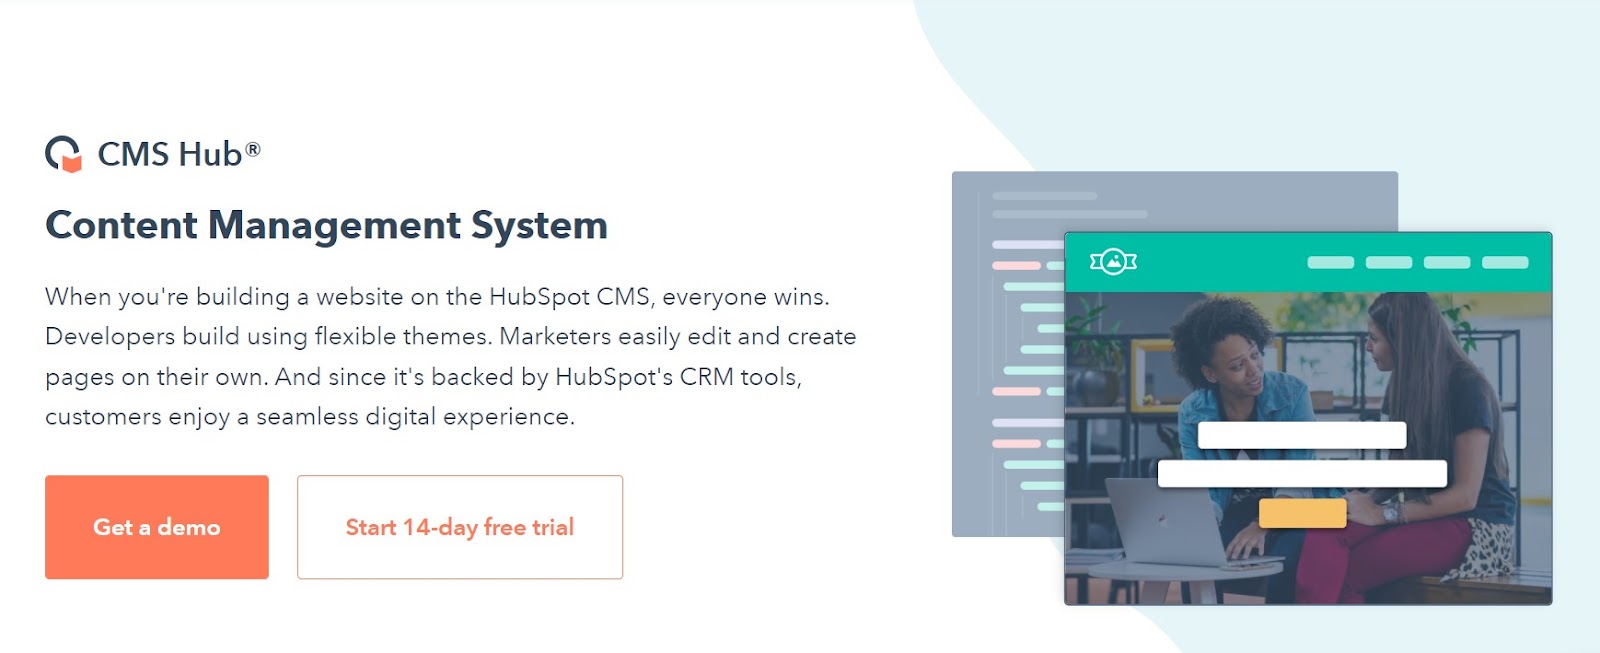 video content management system: CMS Hub product page